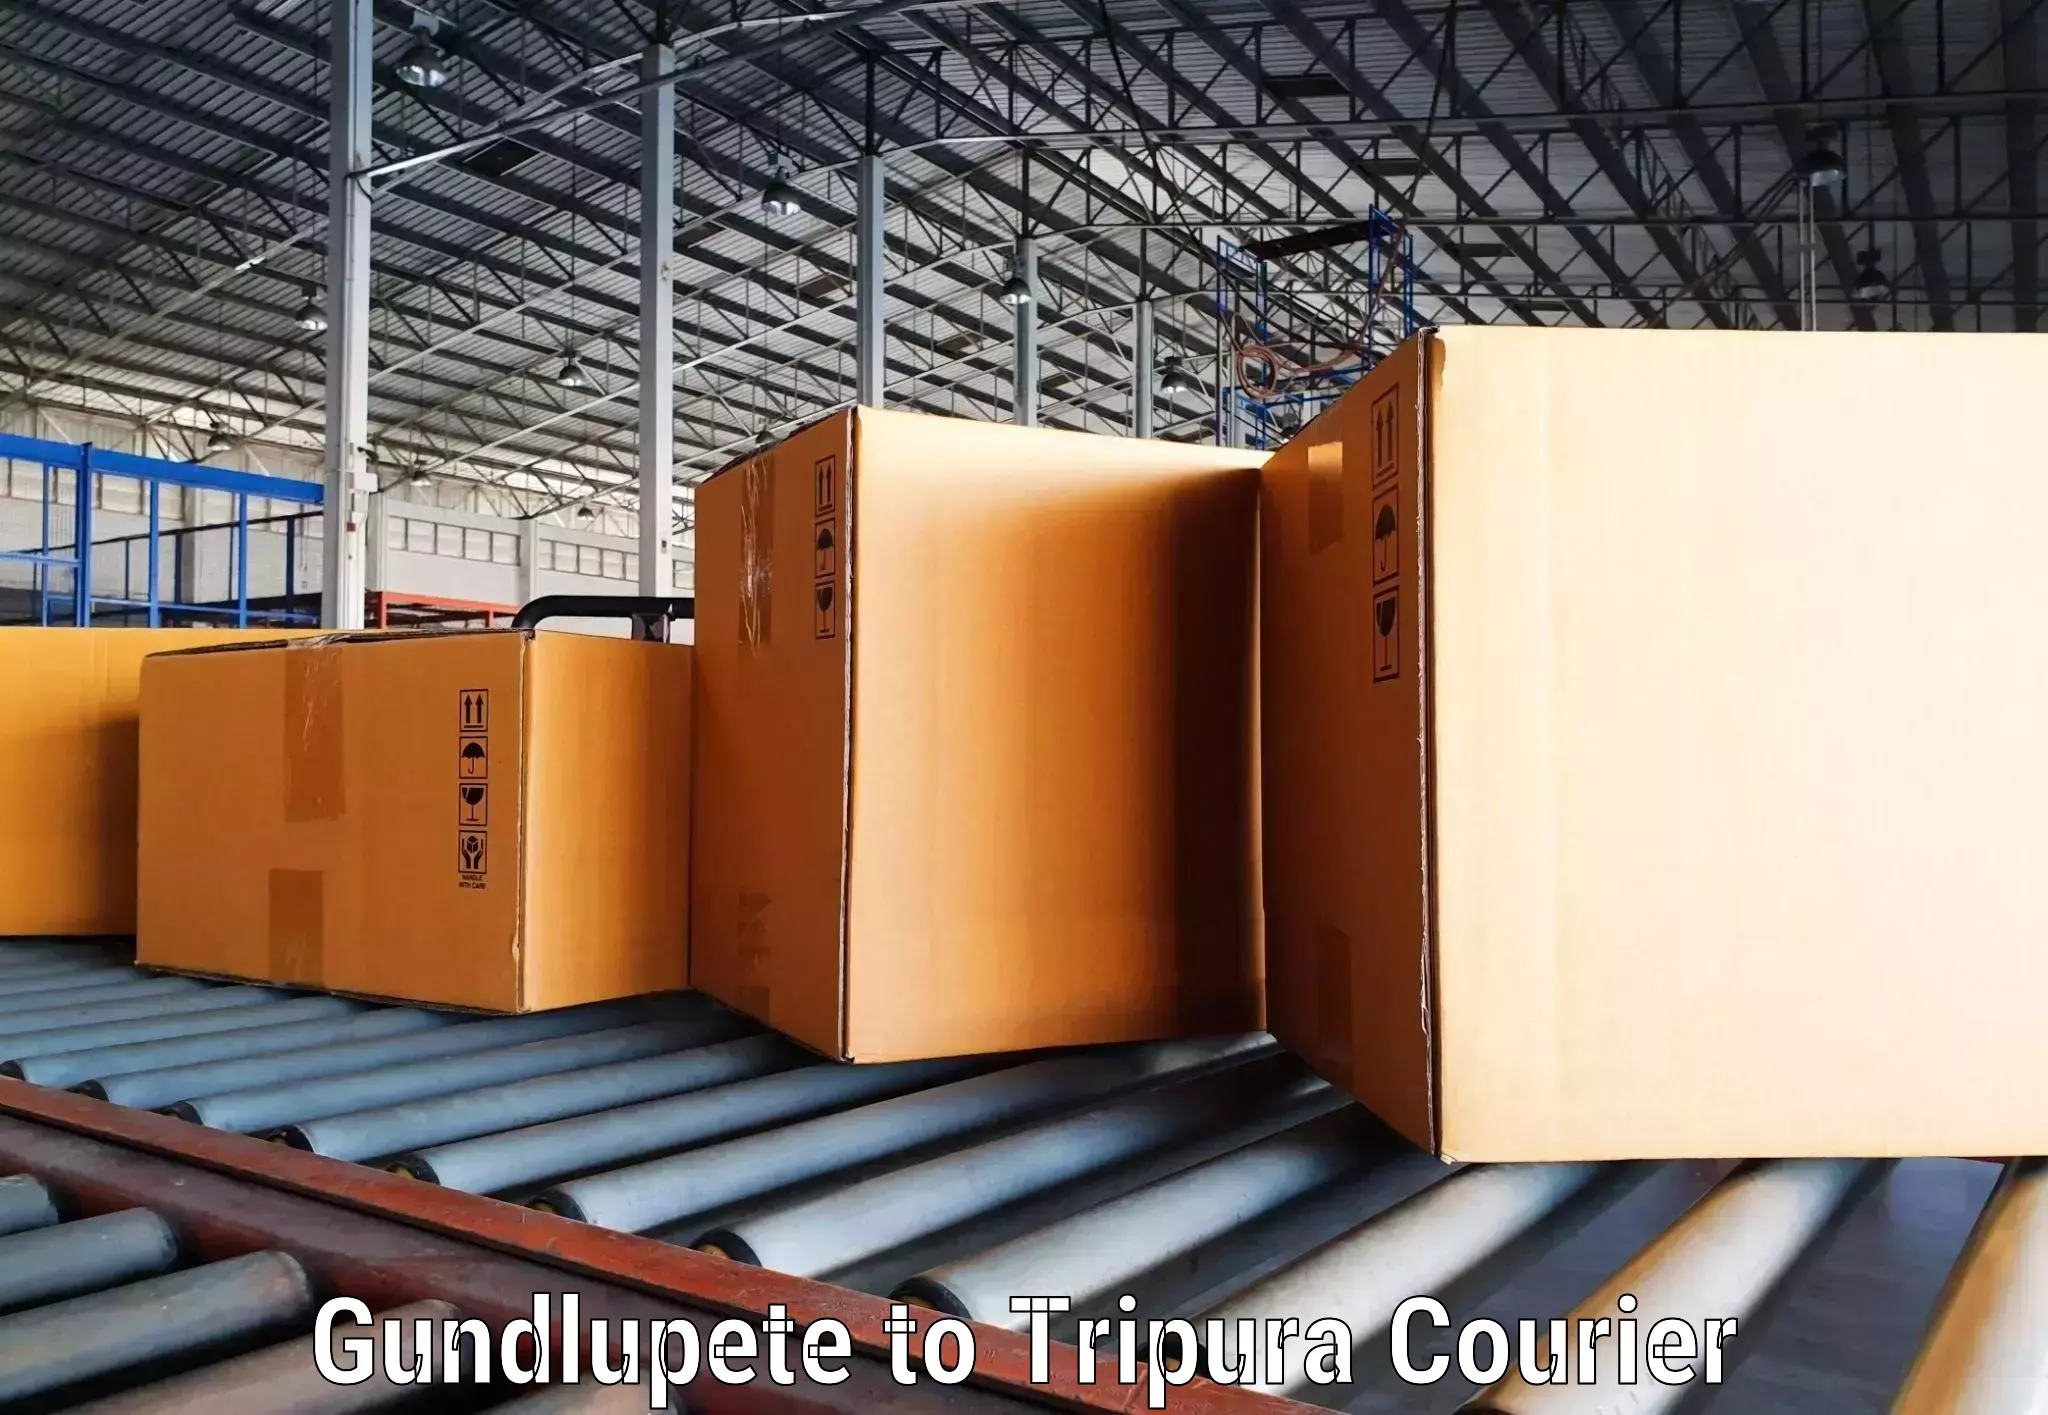 Express courier capabilities in Gundlupete to Tripura